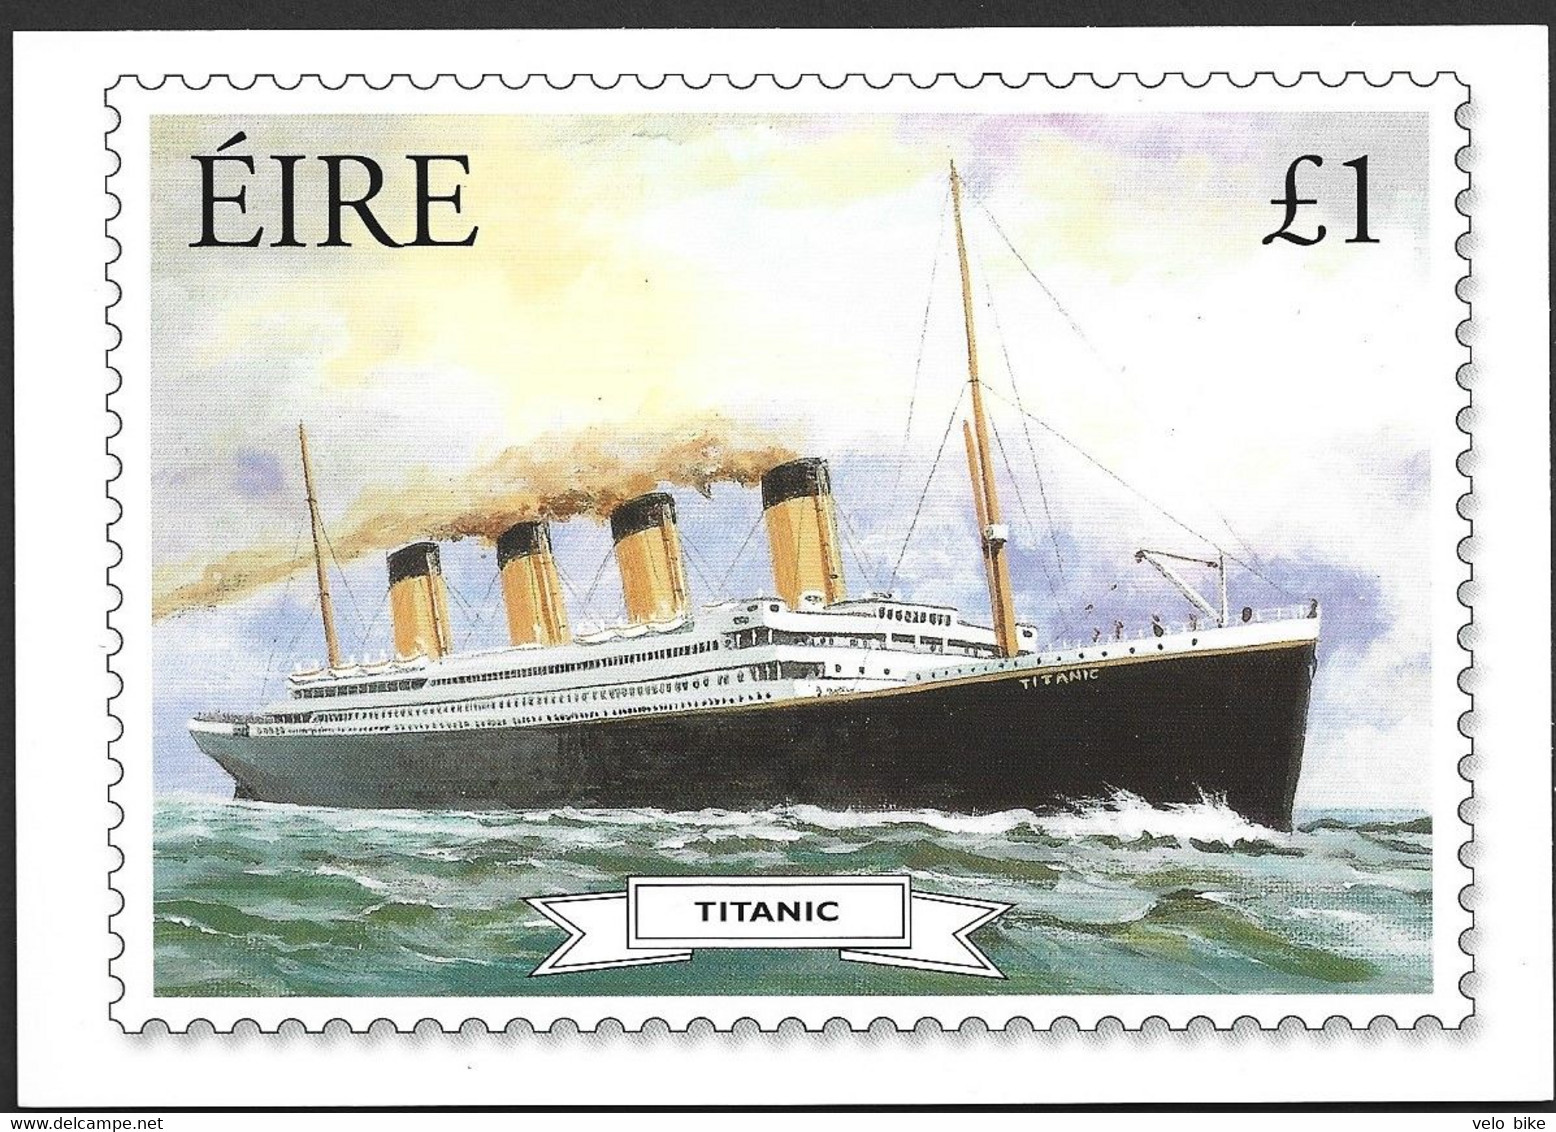 Eire Ireland Postal Stationery Postage Paid Cork 2005 Titanic Ocean Liner Ferry Boat  Priotaire Airmail - Entiers Postaux